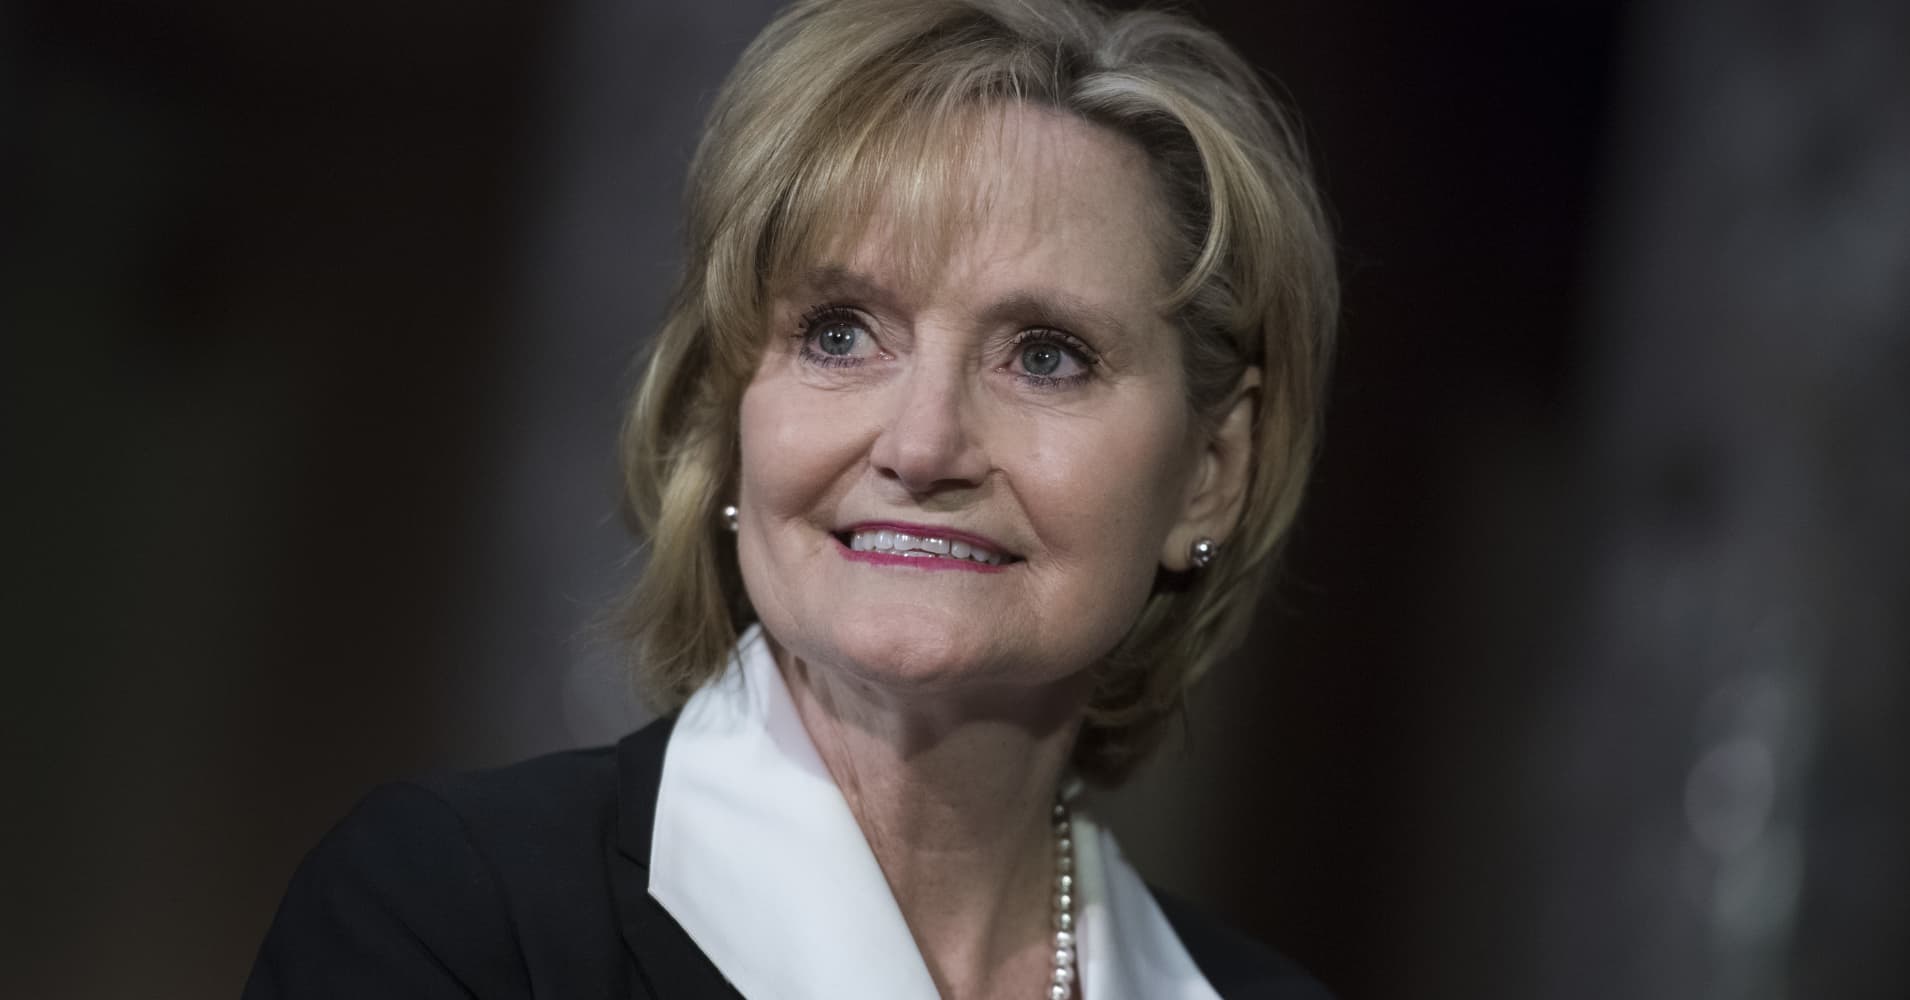 GOP Sen. Hyde-Smith projected to win Mississippi Senate election roiled by 'public hanging' comment